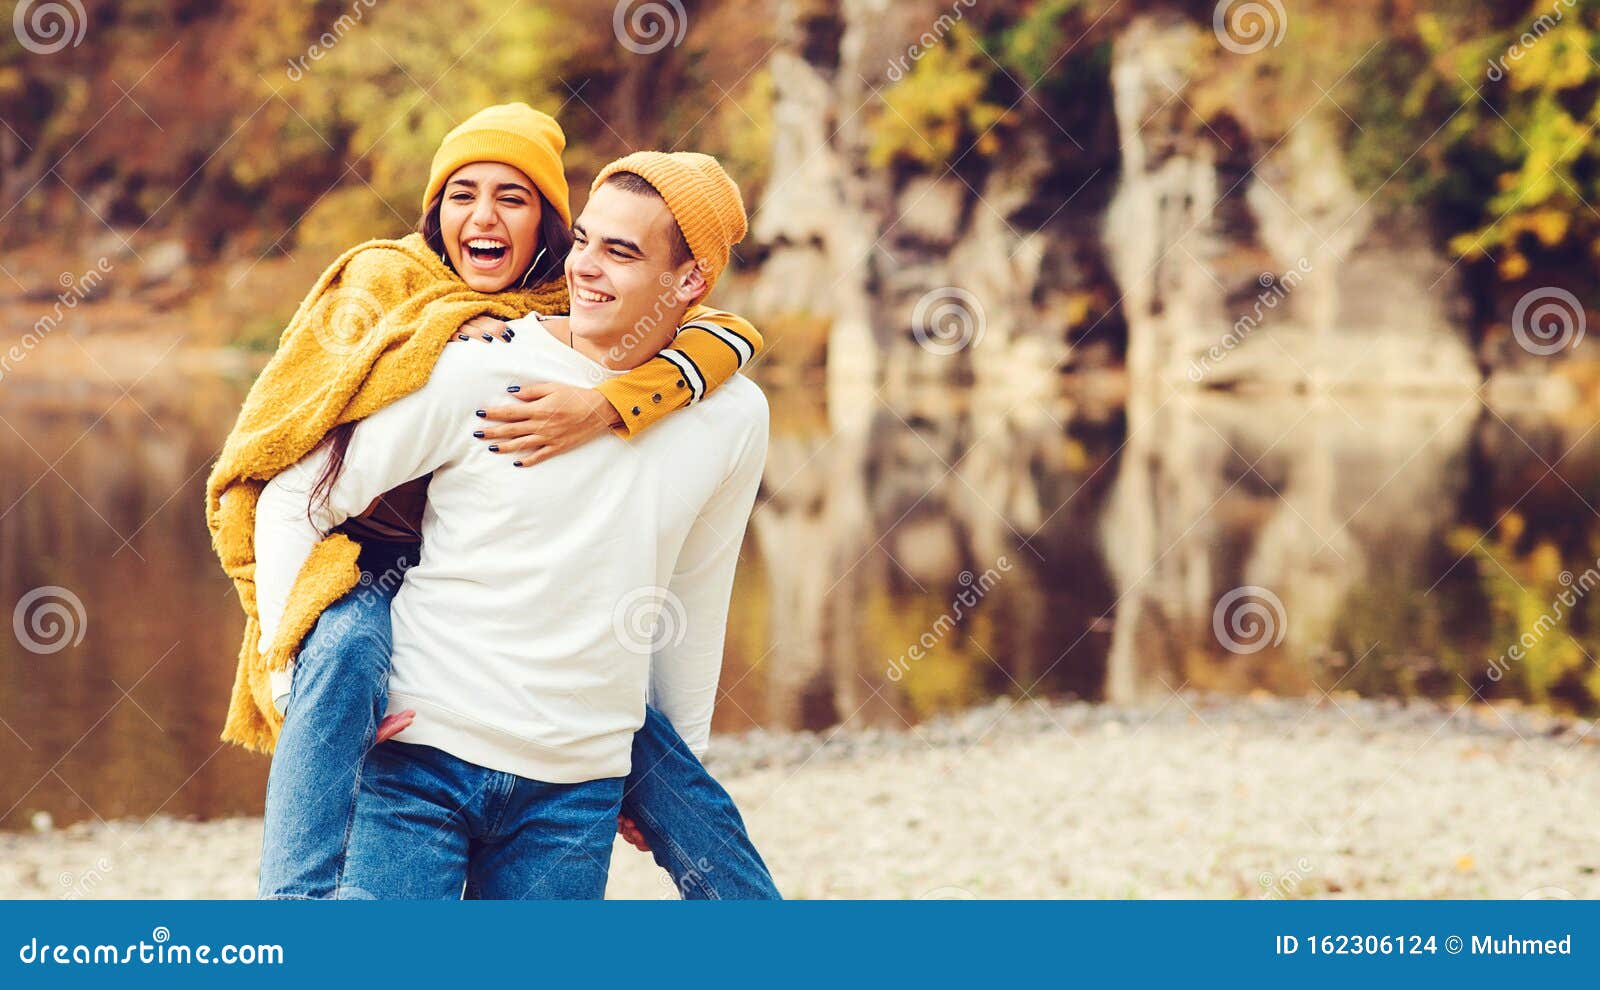 Happy Fashionable Couple Having Fun Together Outdoors Love